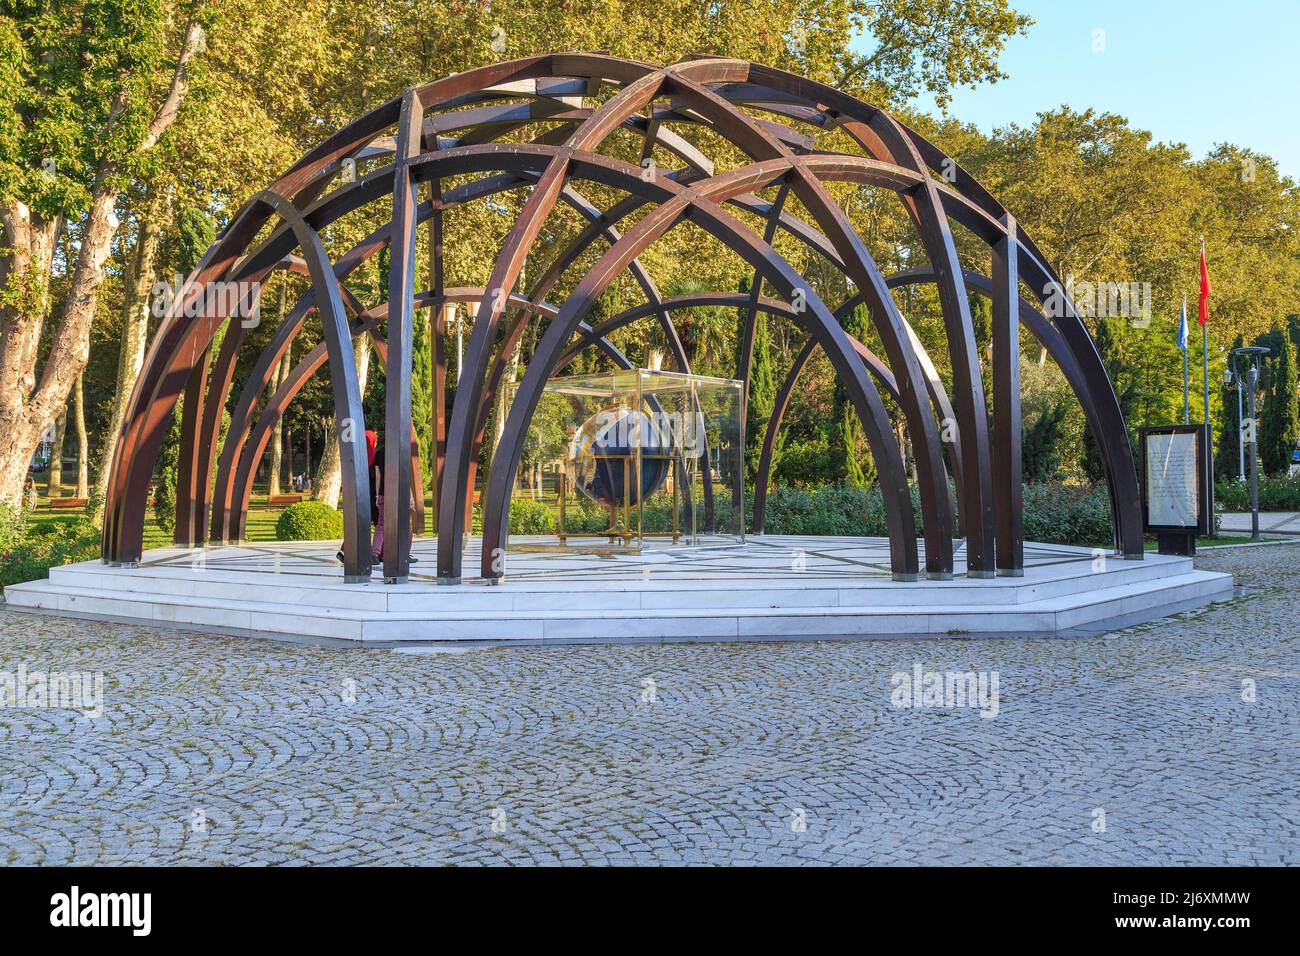 ISTANBUL, TURKEY - SEPTEMBER 13, 2017: This is an art installation with a copy of the globe of Baghdad Caliph in front of the Museum of Technology. Stock Photo